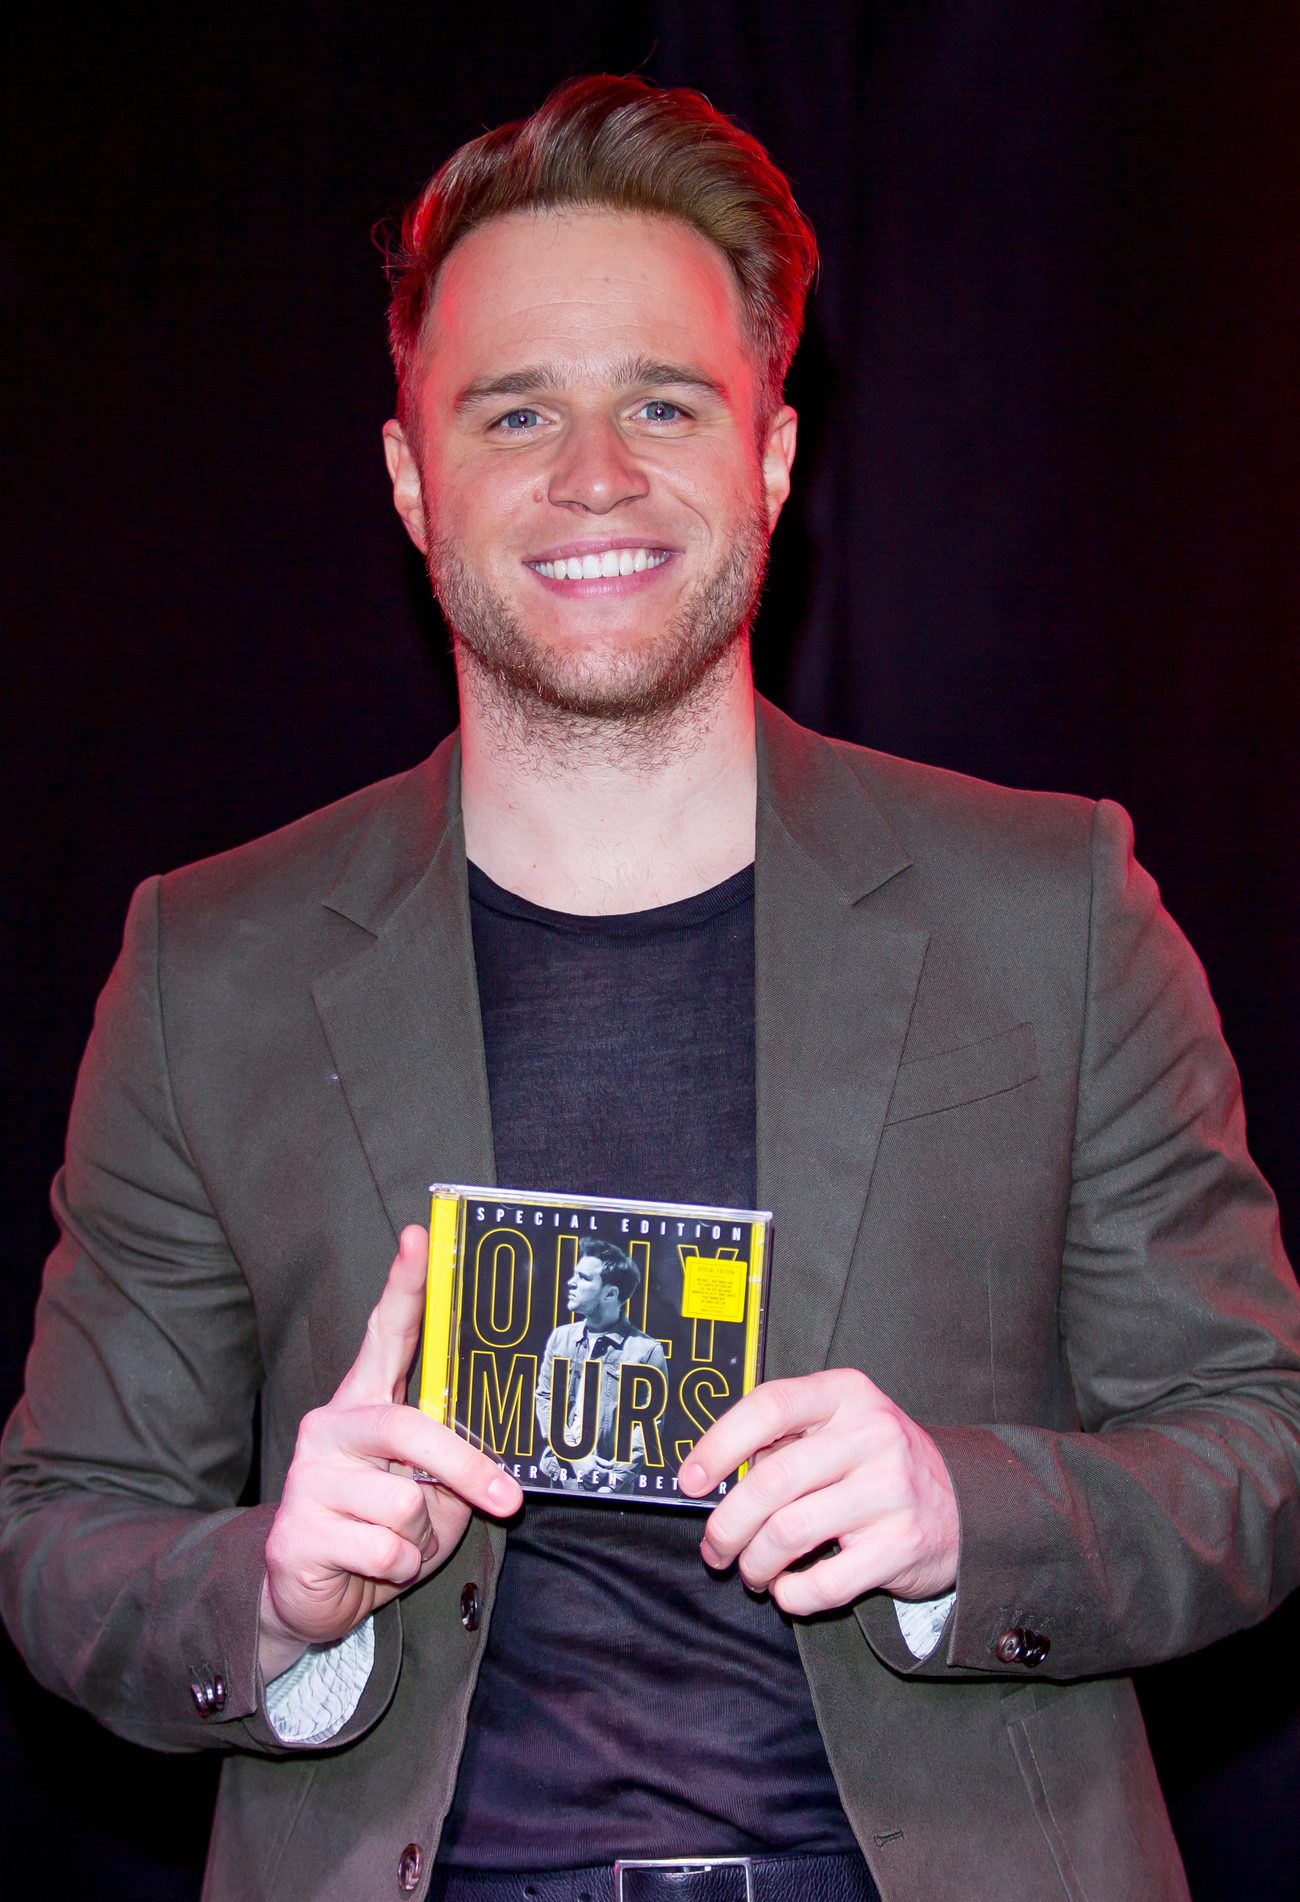 Olly Murs Signs Copies of His Never Been Better: Special Edition CDDVD in NYst